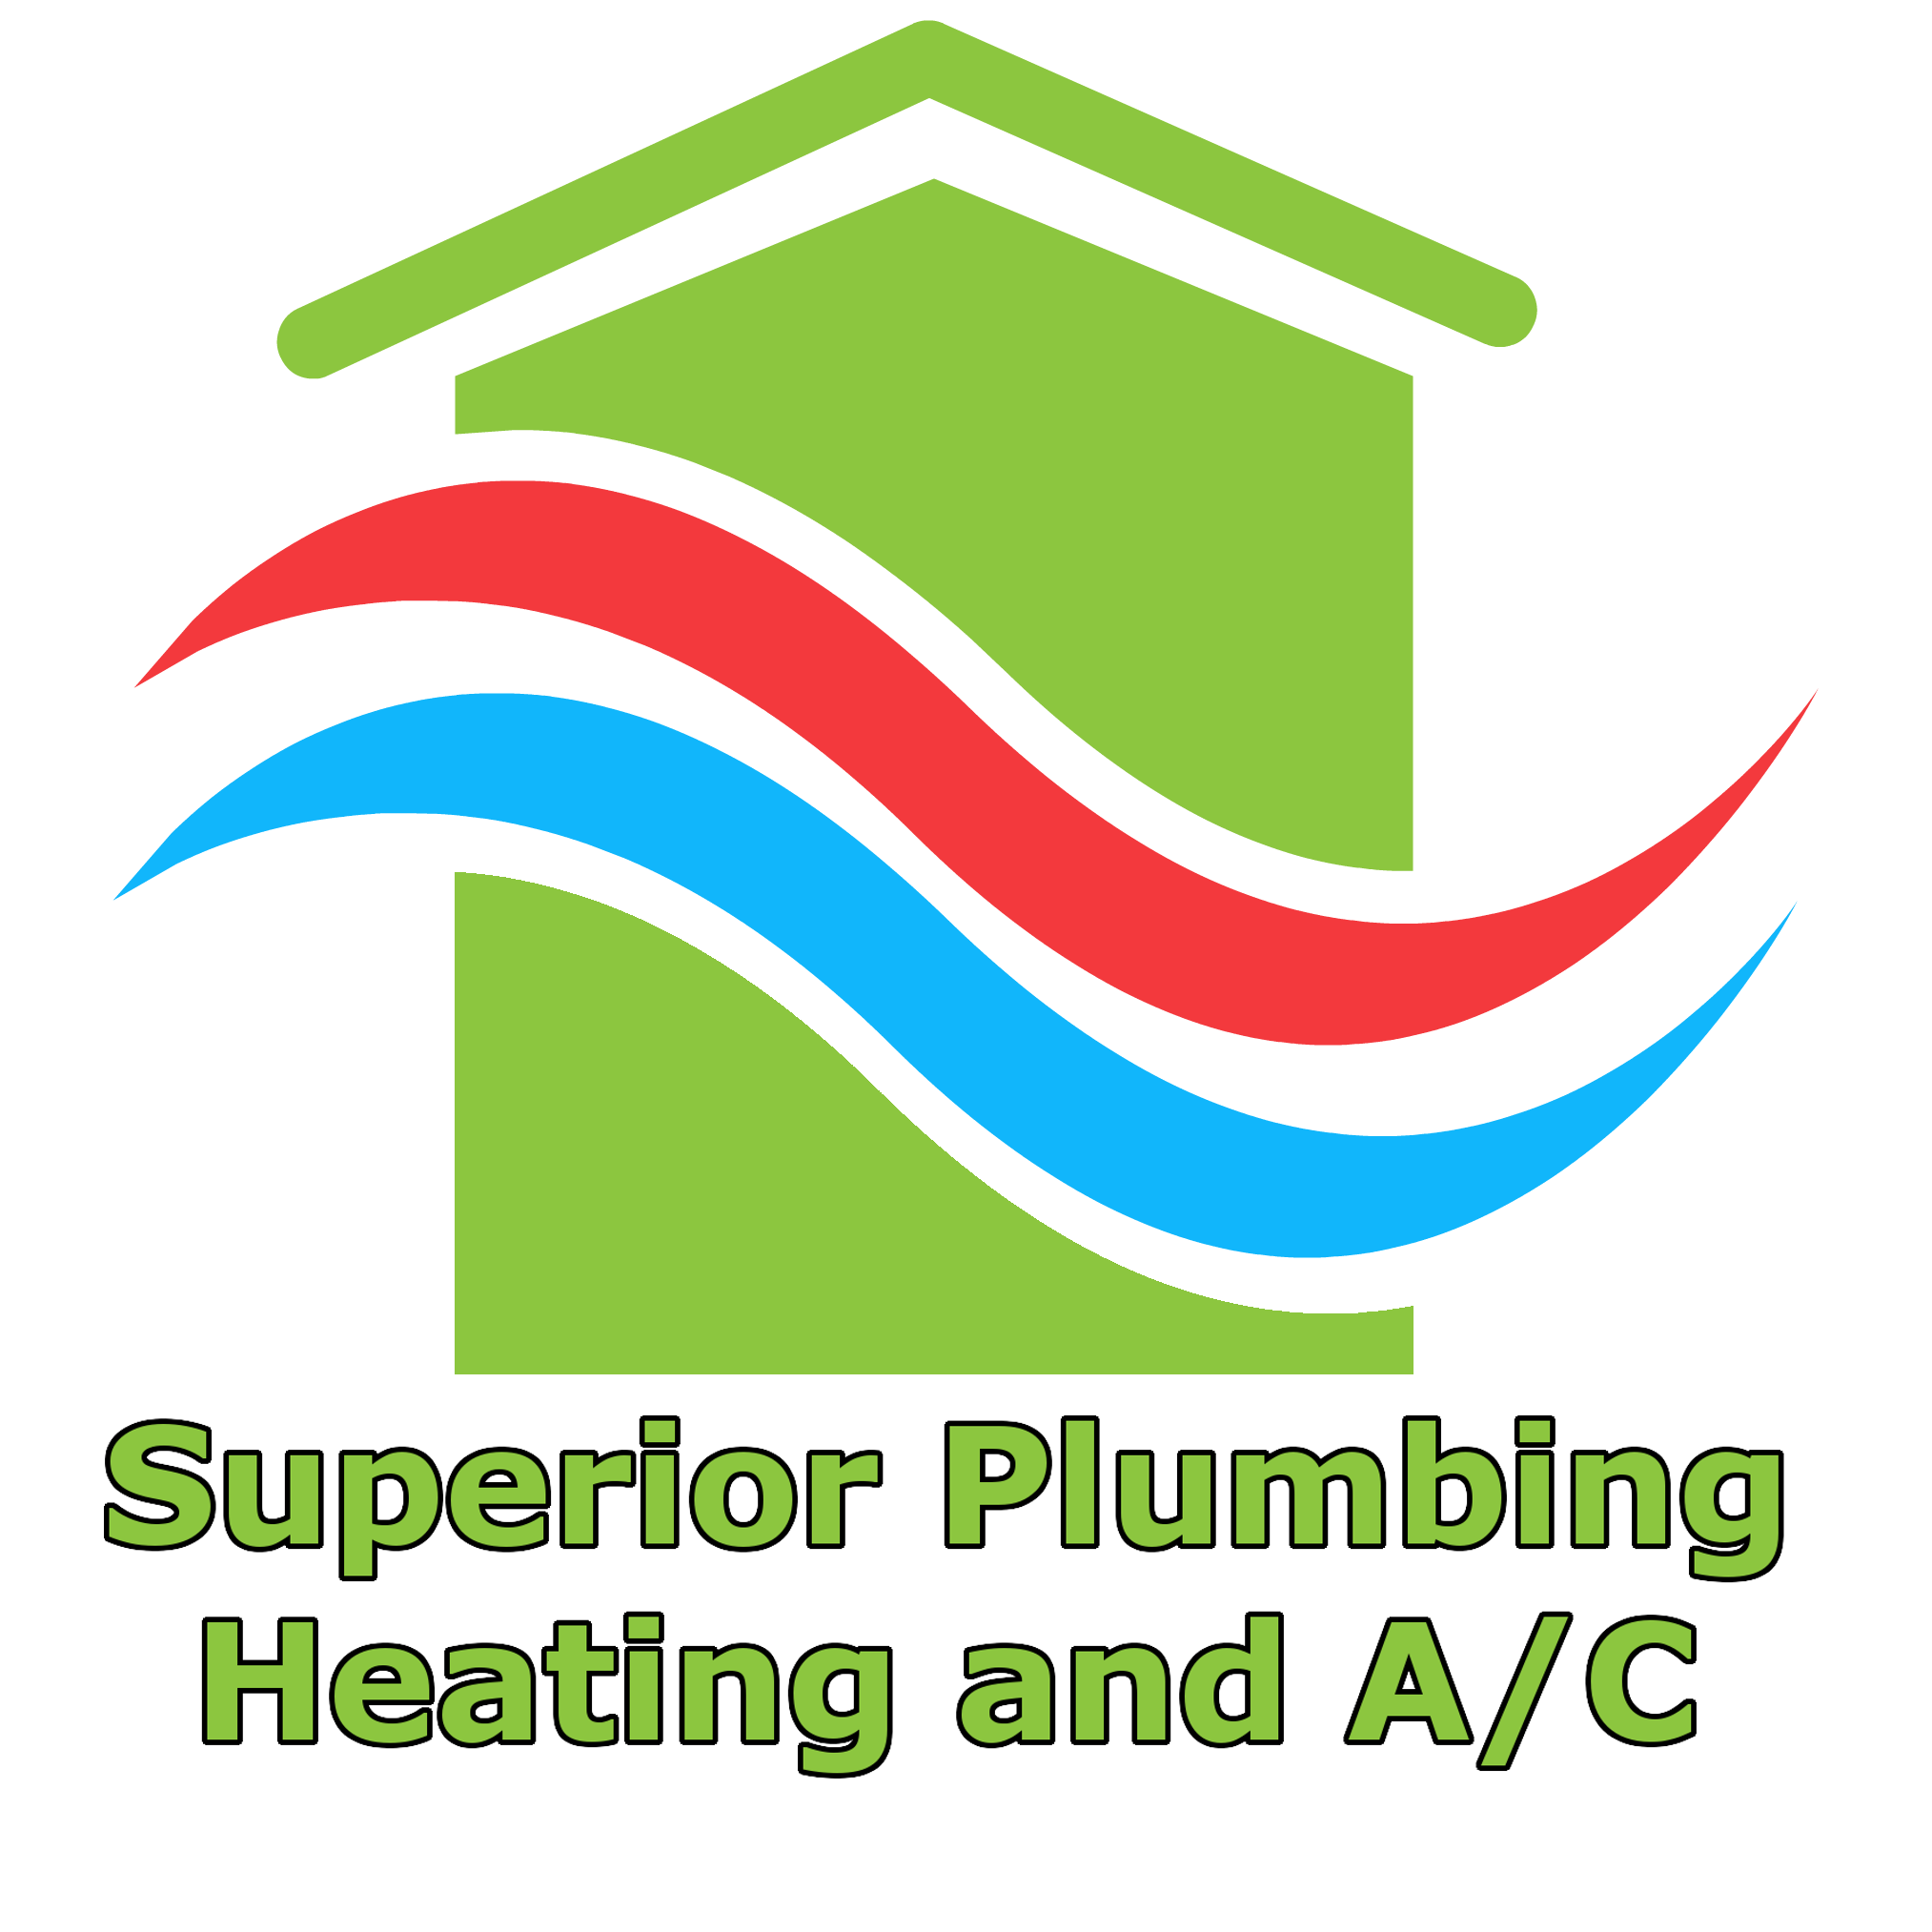 Superior Plumbing, Heating and A/C - Riverside, CA 92503 - (909)319-0746 | ShowMeLocal.com